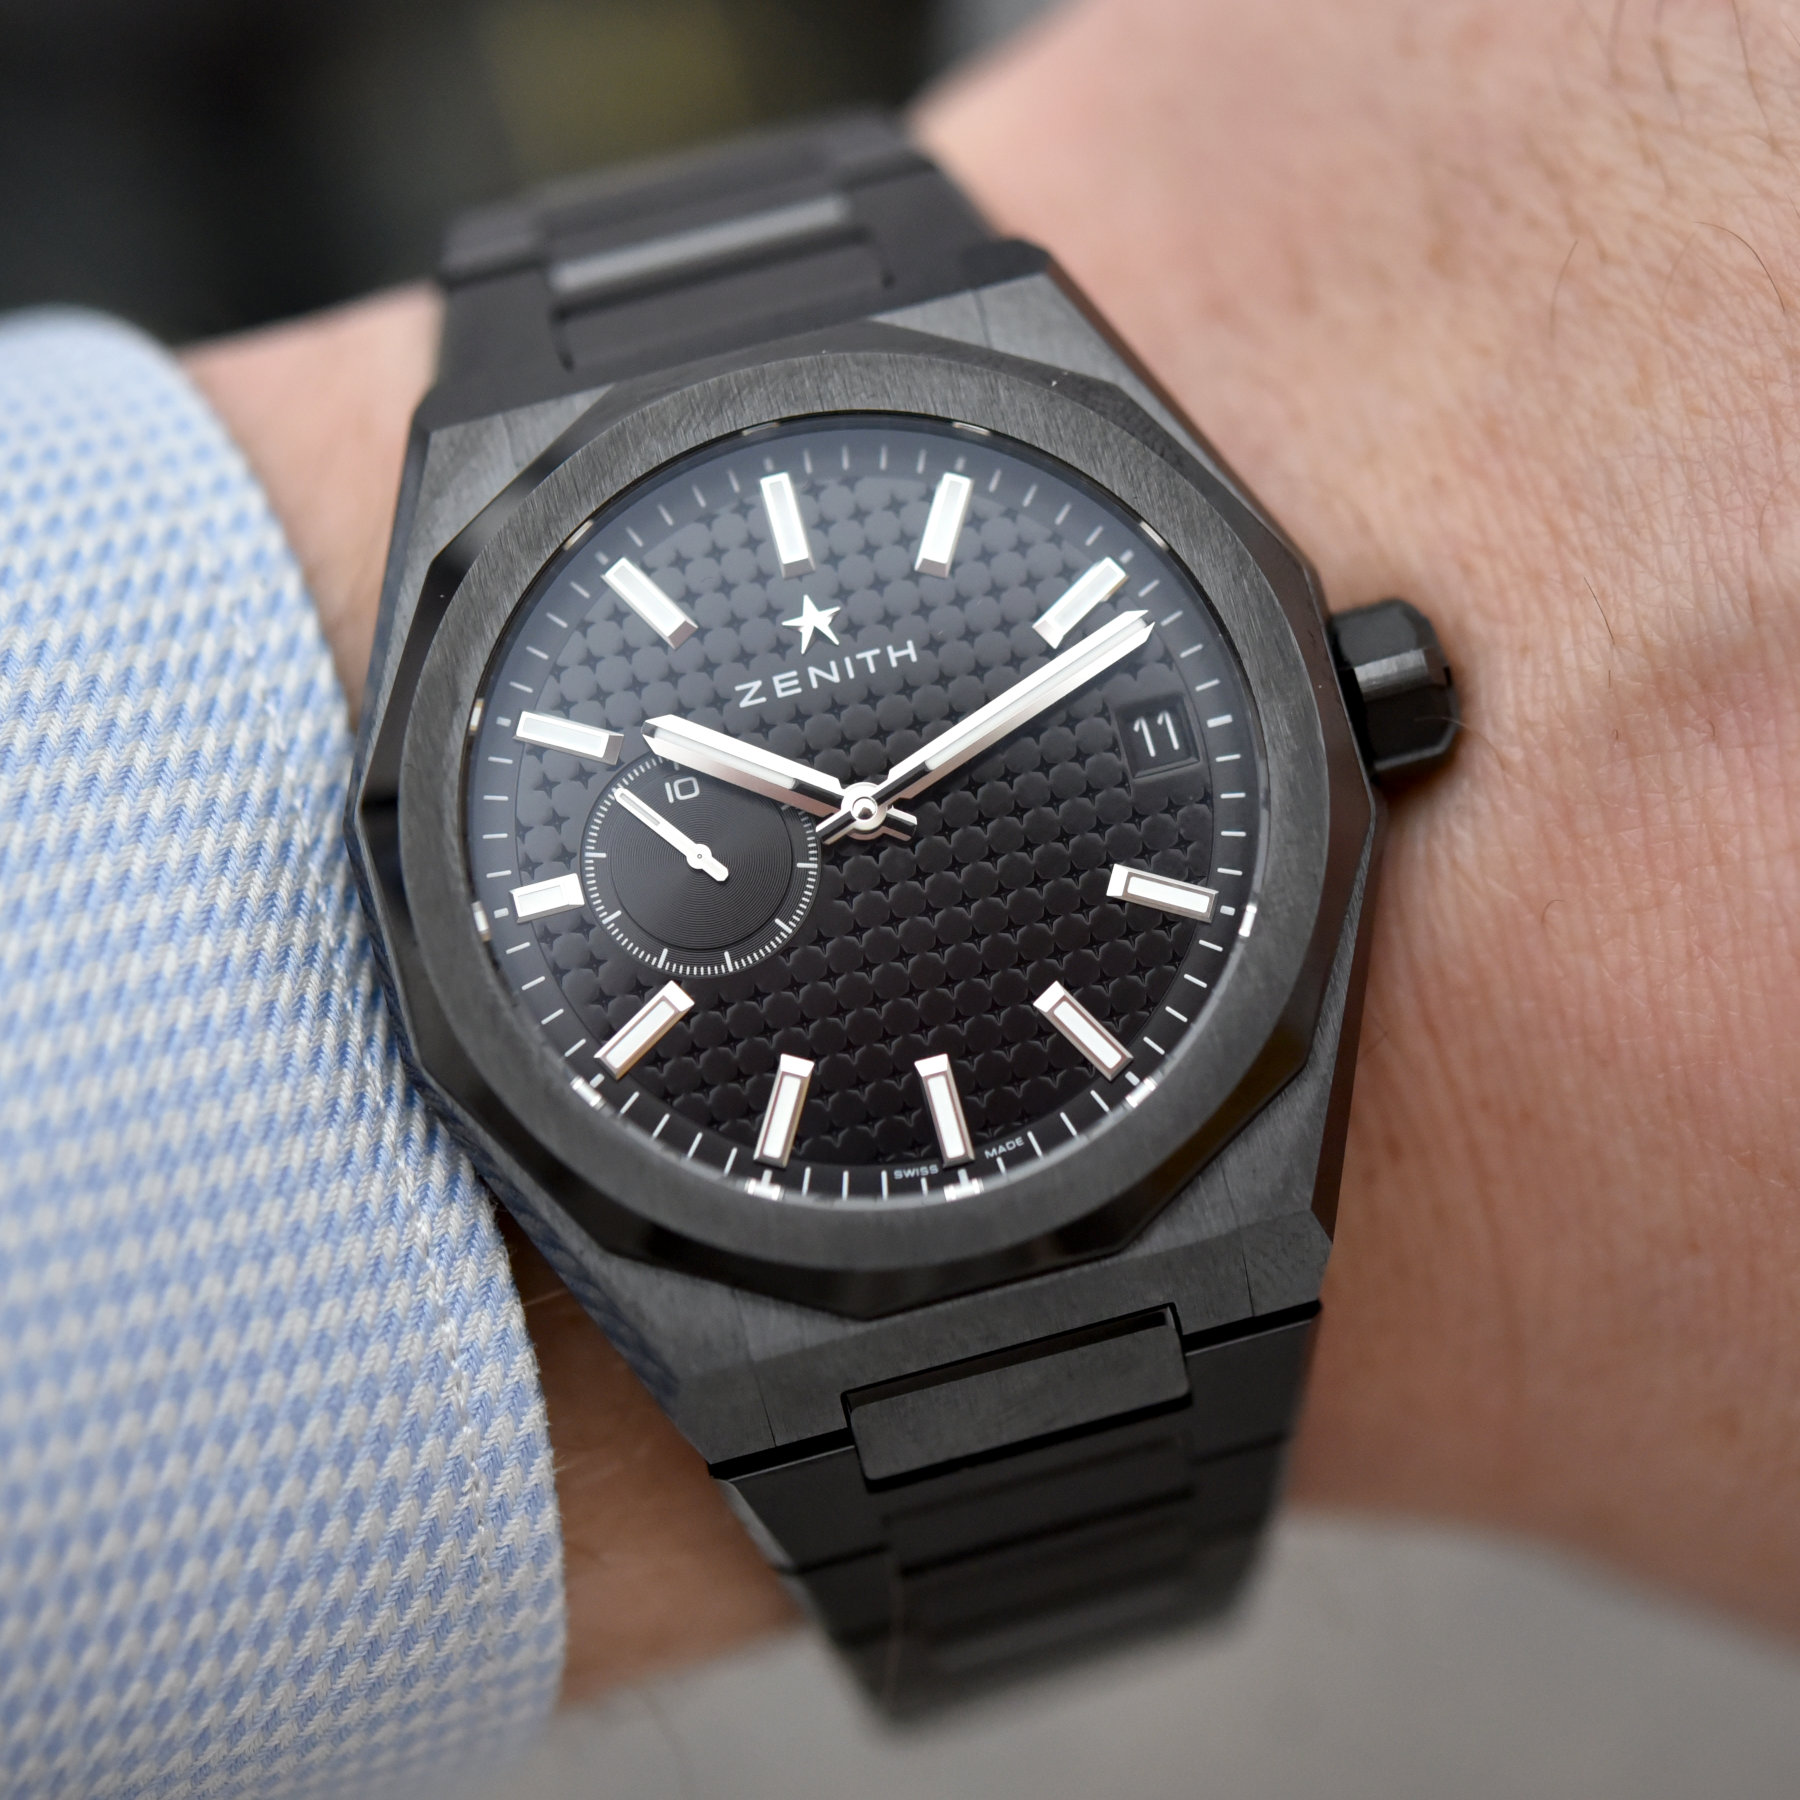 VIDEO] Hands-On: Zenith Opens Up the Defy Skyline with Skyline